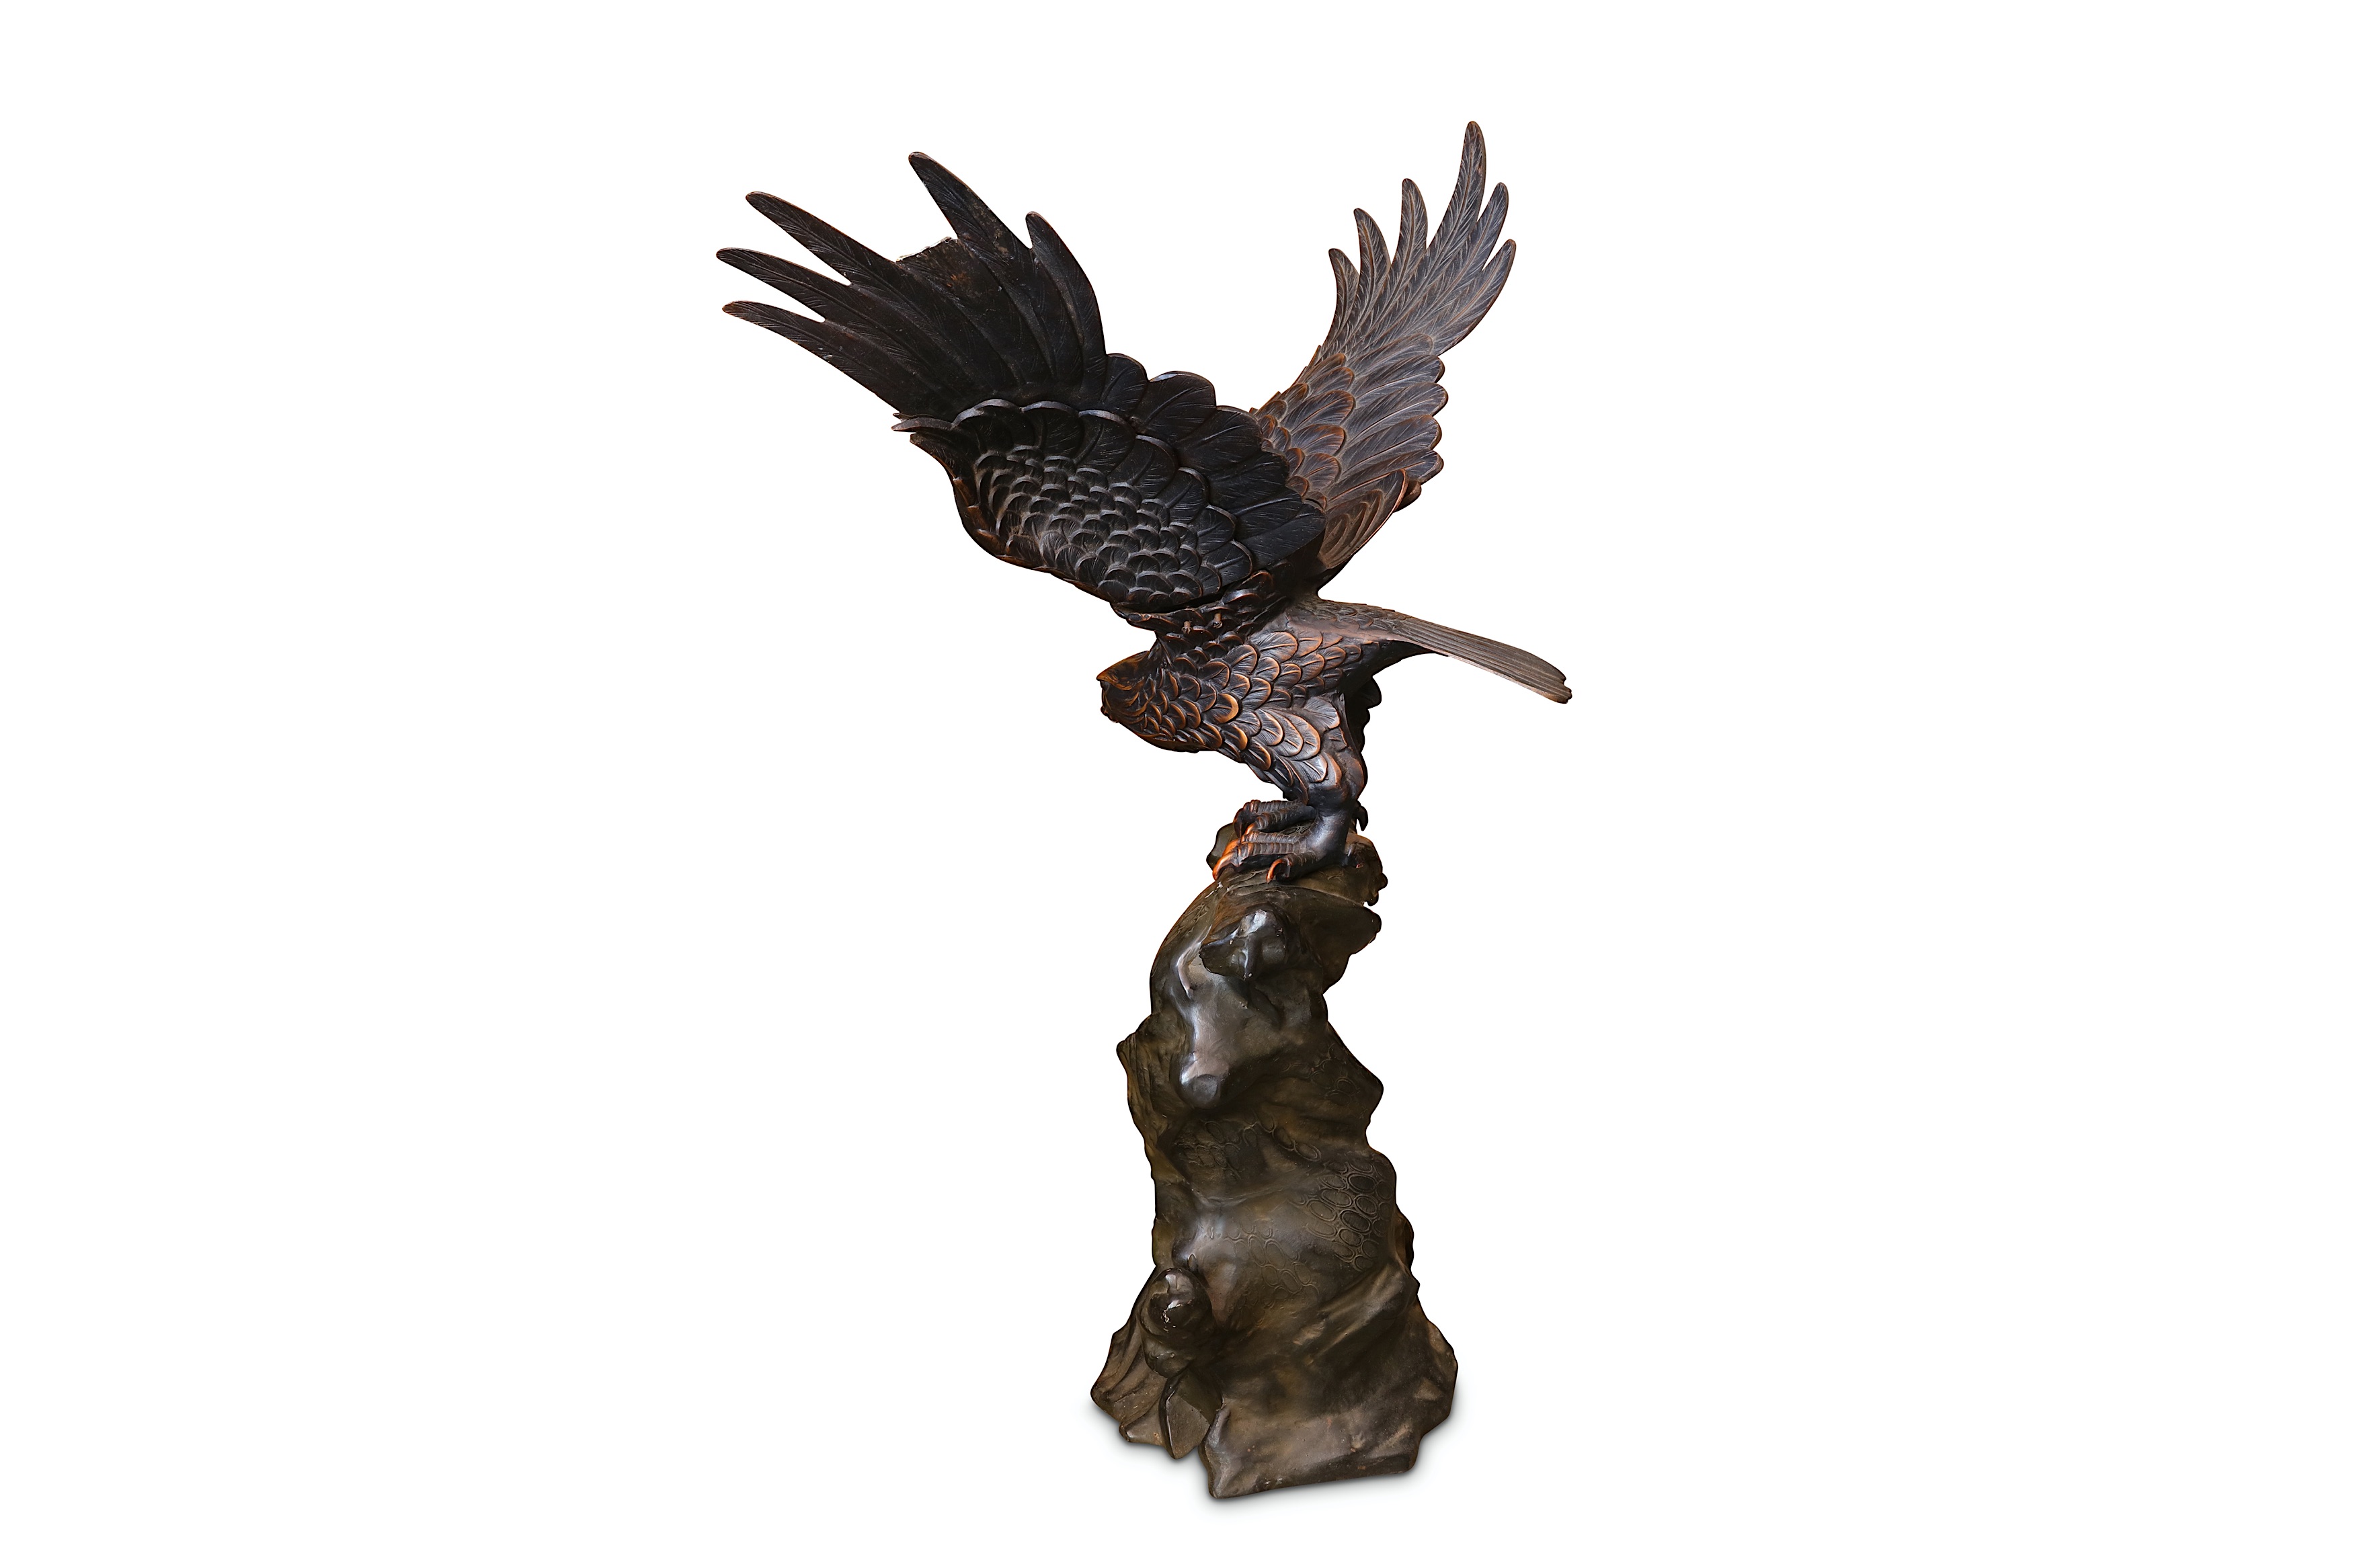 A VERY LARGE BRONZED METAL MODEL OF AN EAGLE - Image 2 of 4